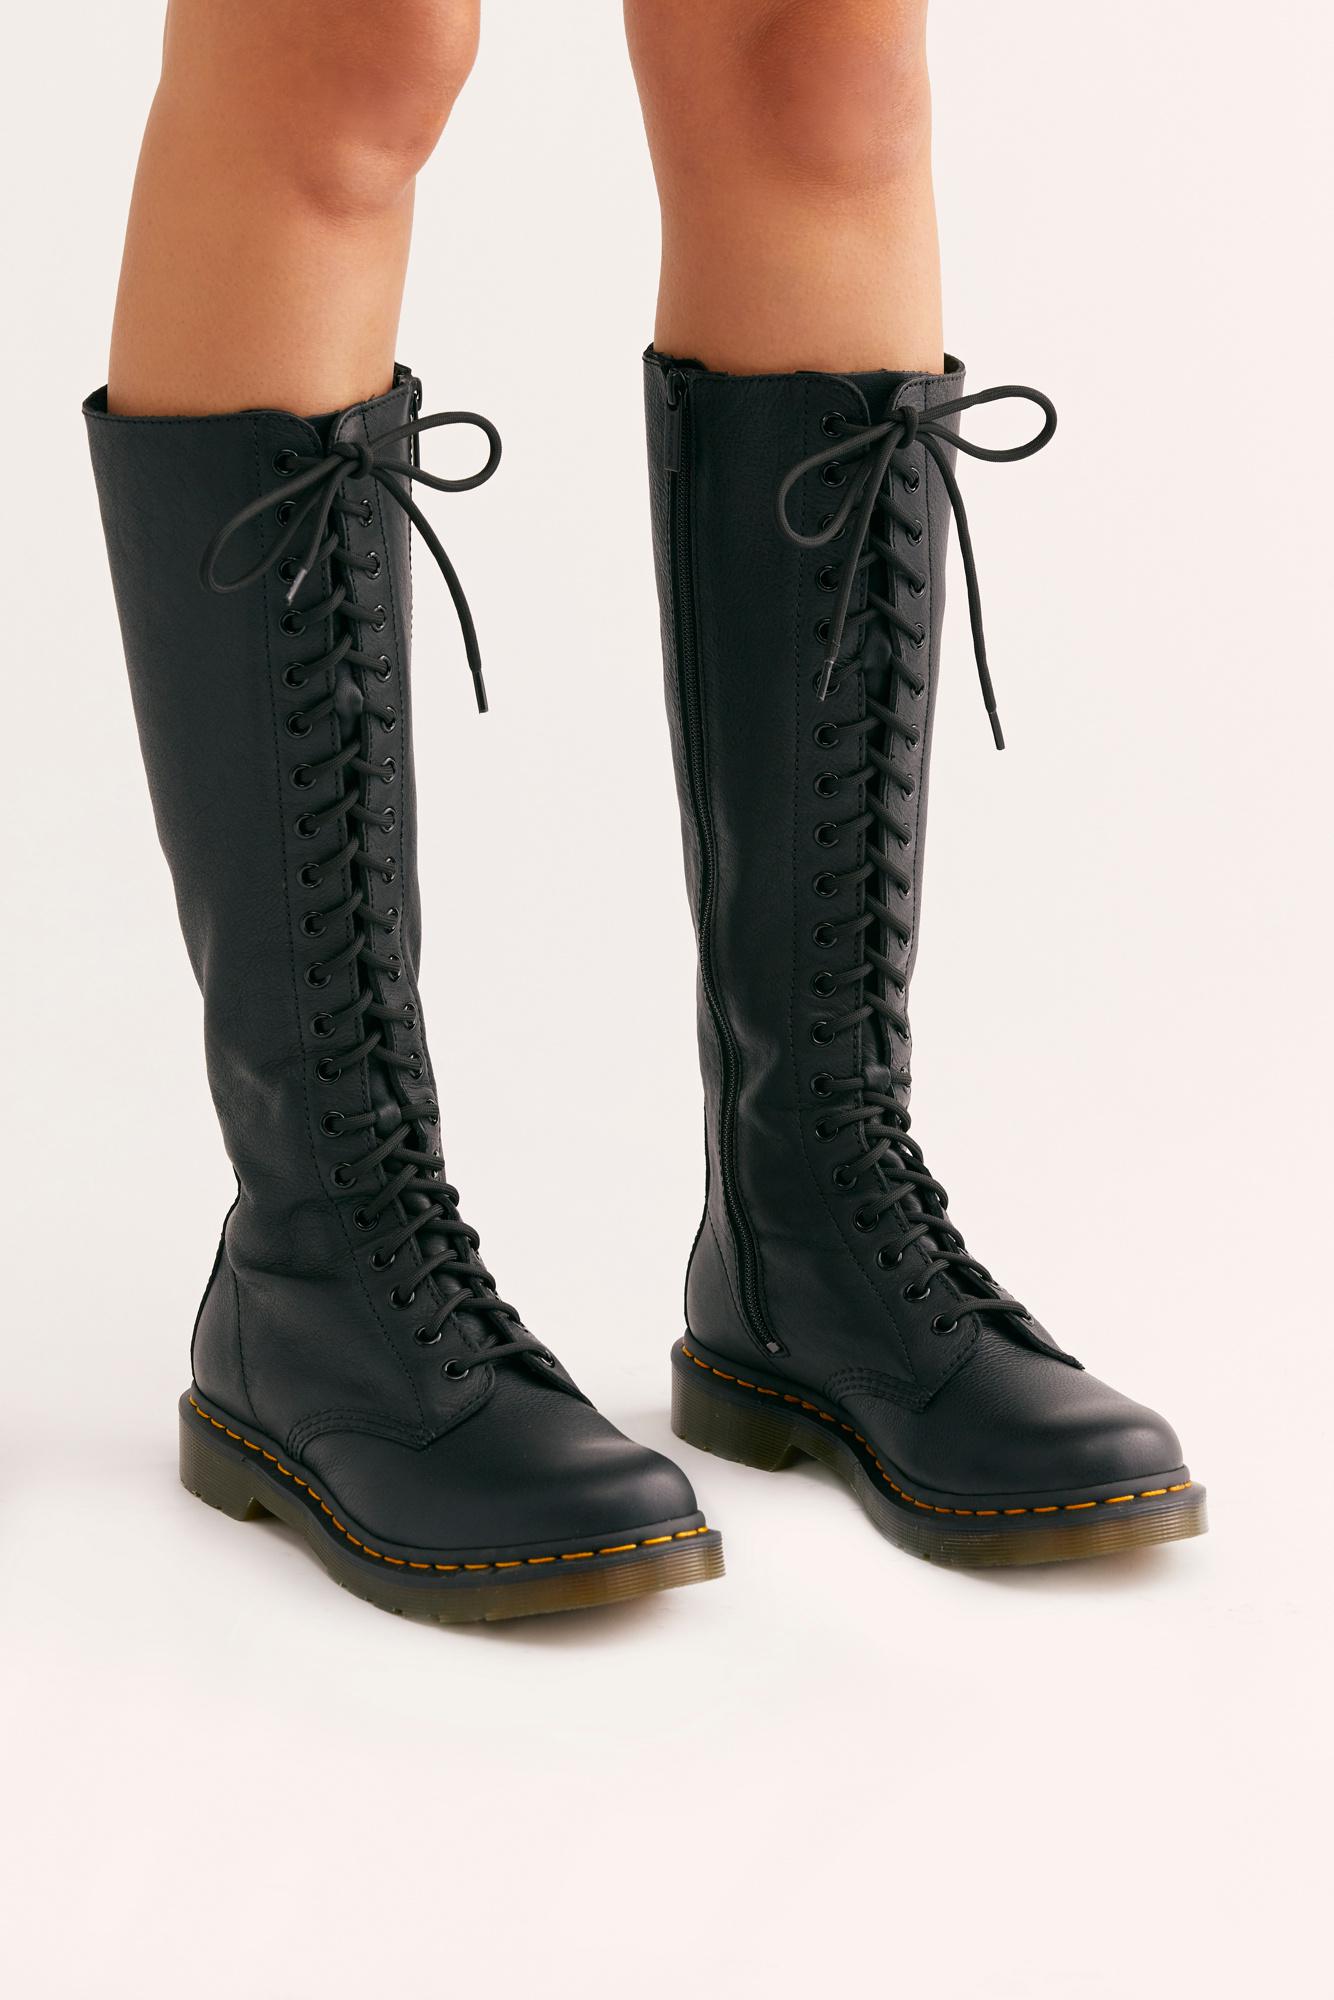 Free People Leather 1860 20-eye Boot By Dr. Martens in Black - Lyst